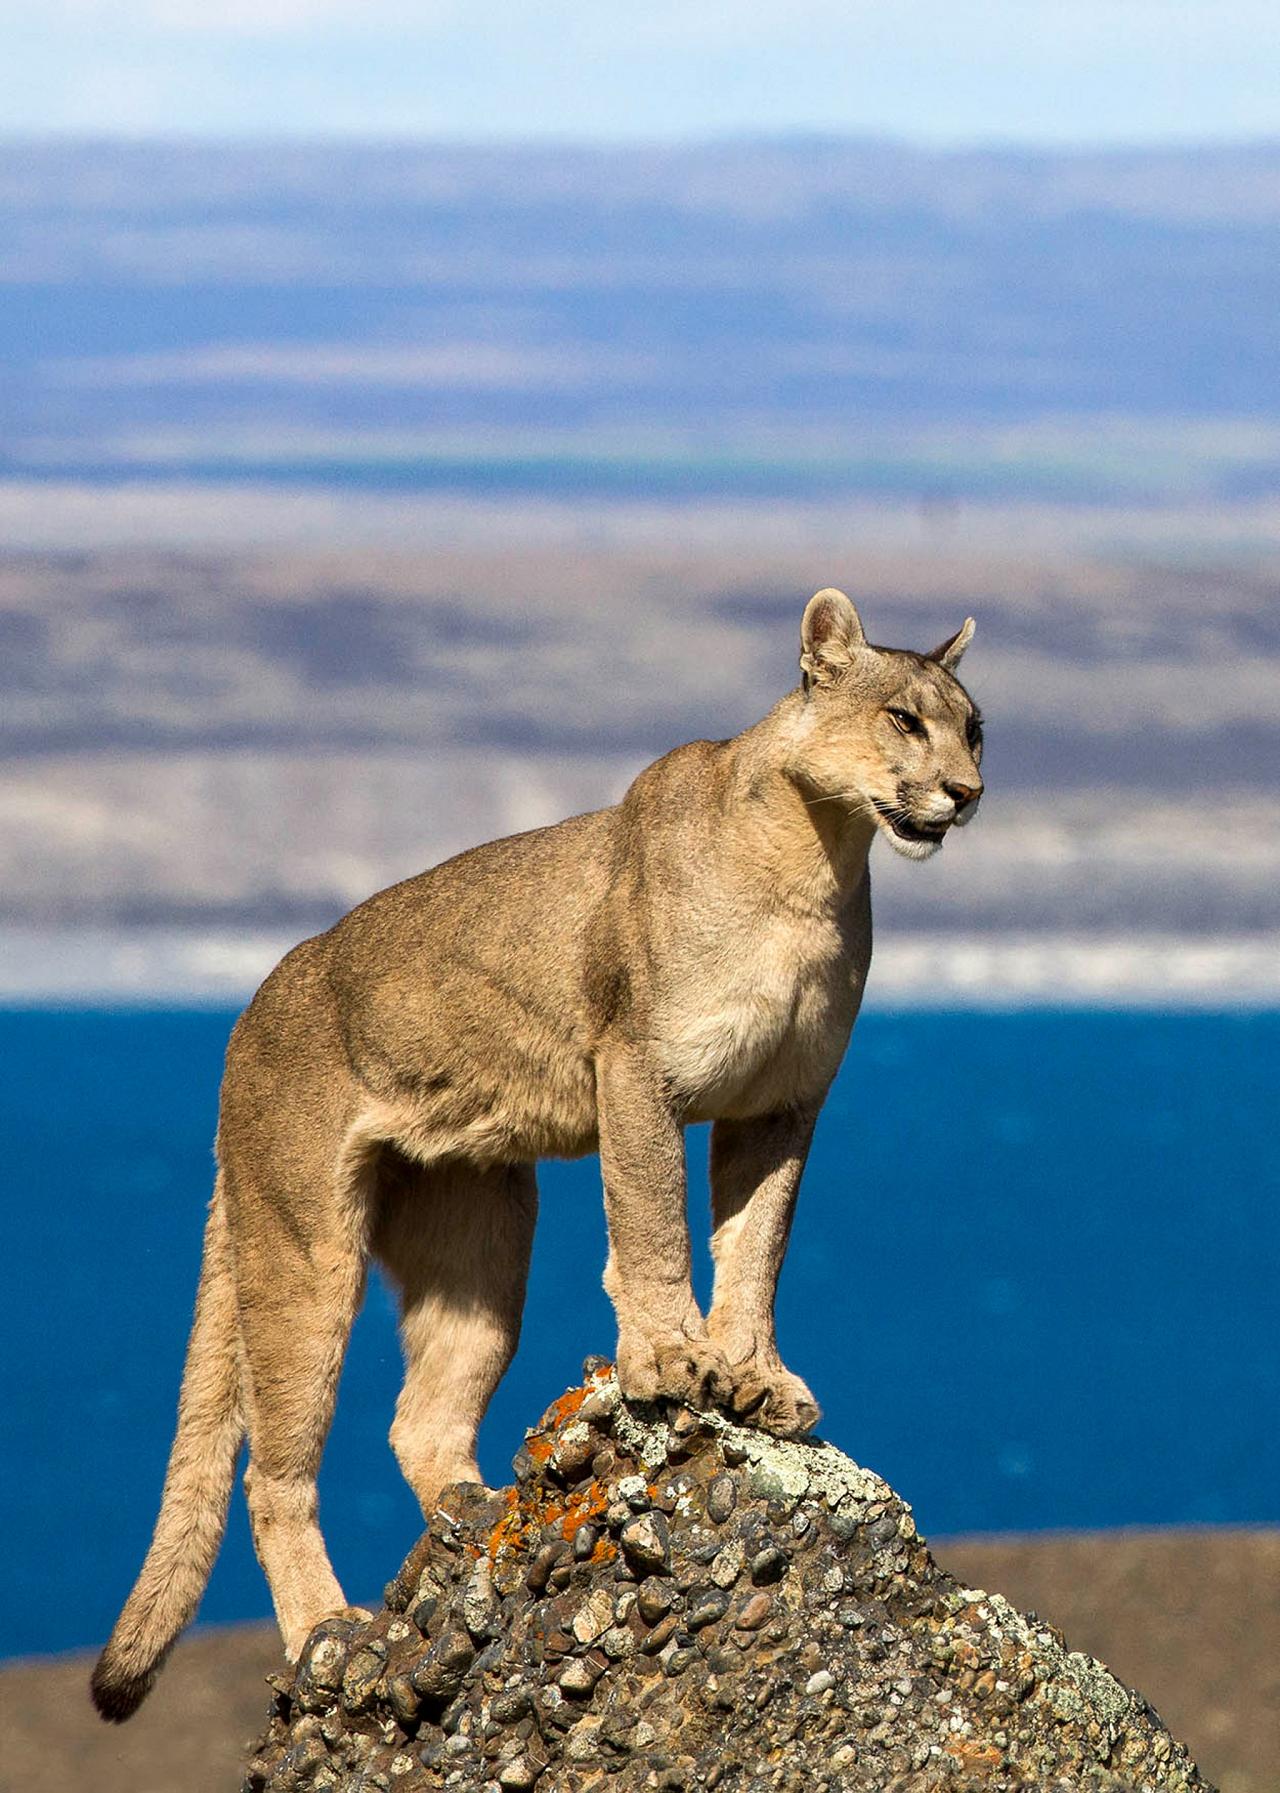 Puma by Jerry Knabe, Patagonia, Patagonia Nature Tour, Naturalist Journeys, Argentina, Chile